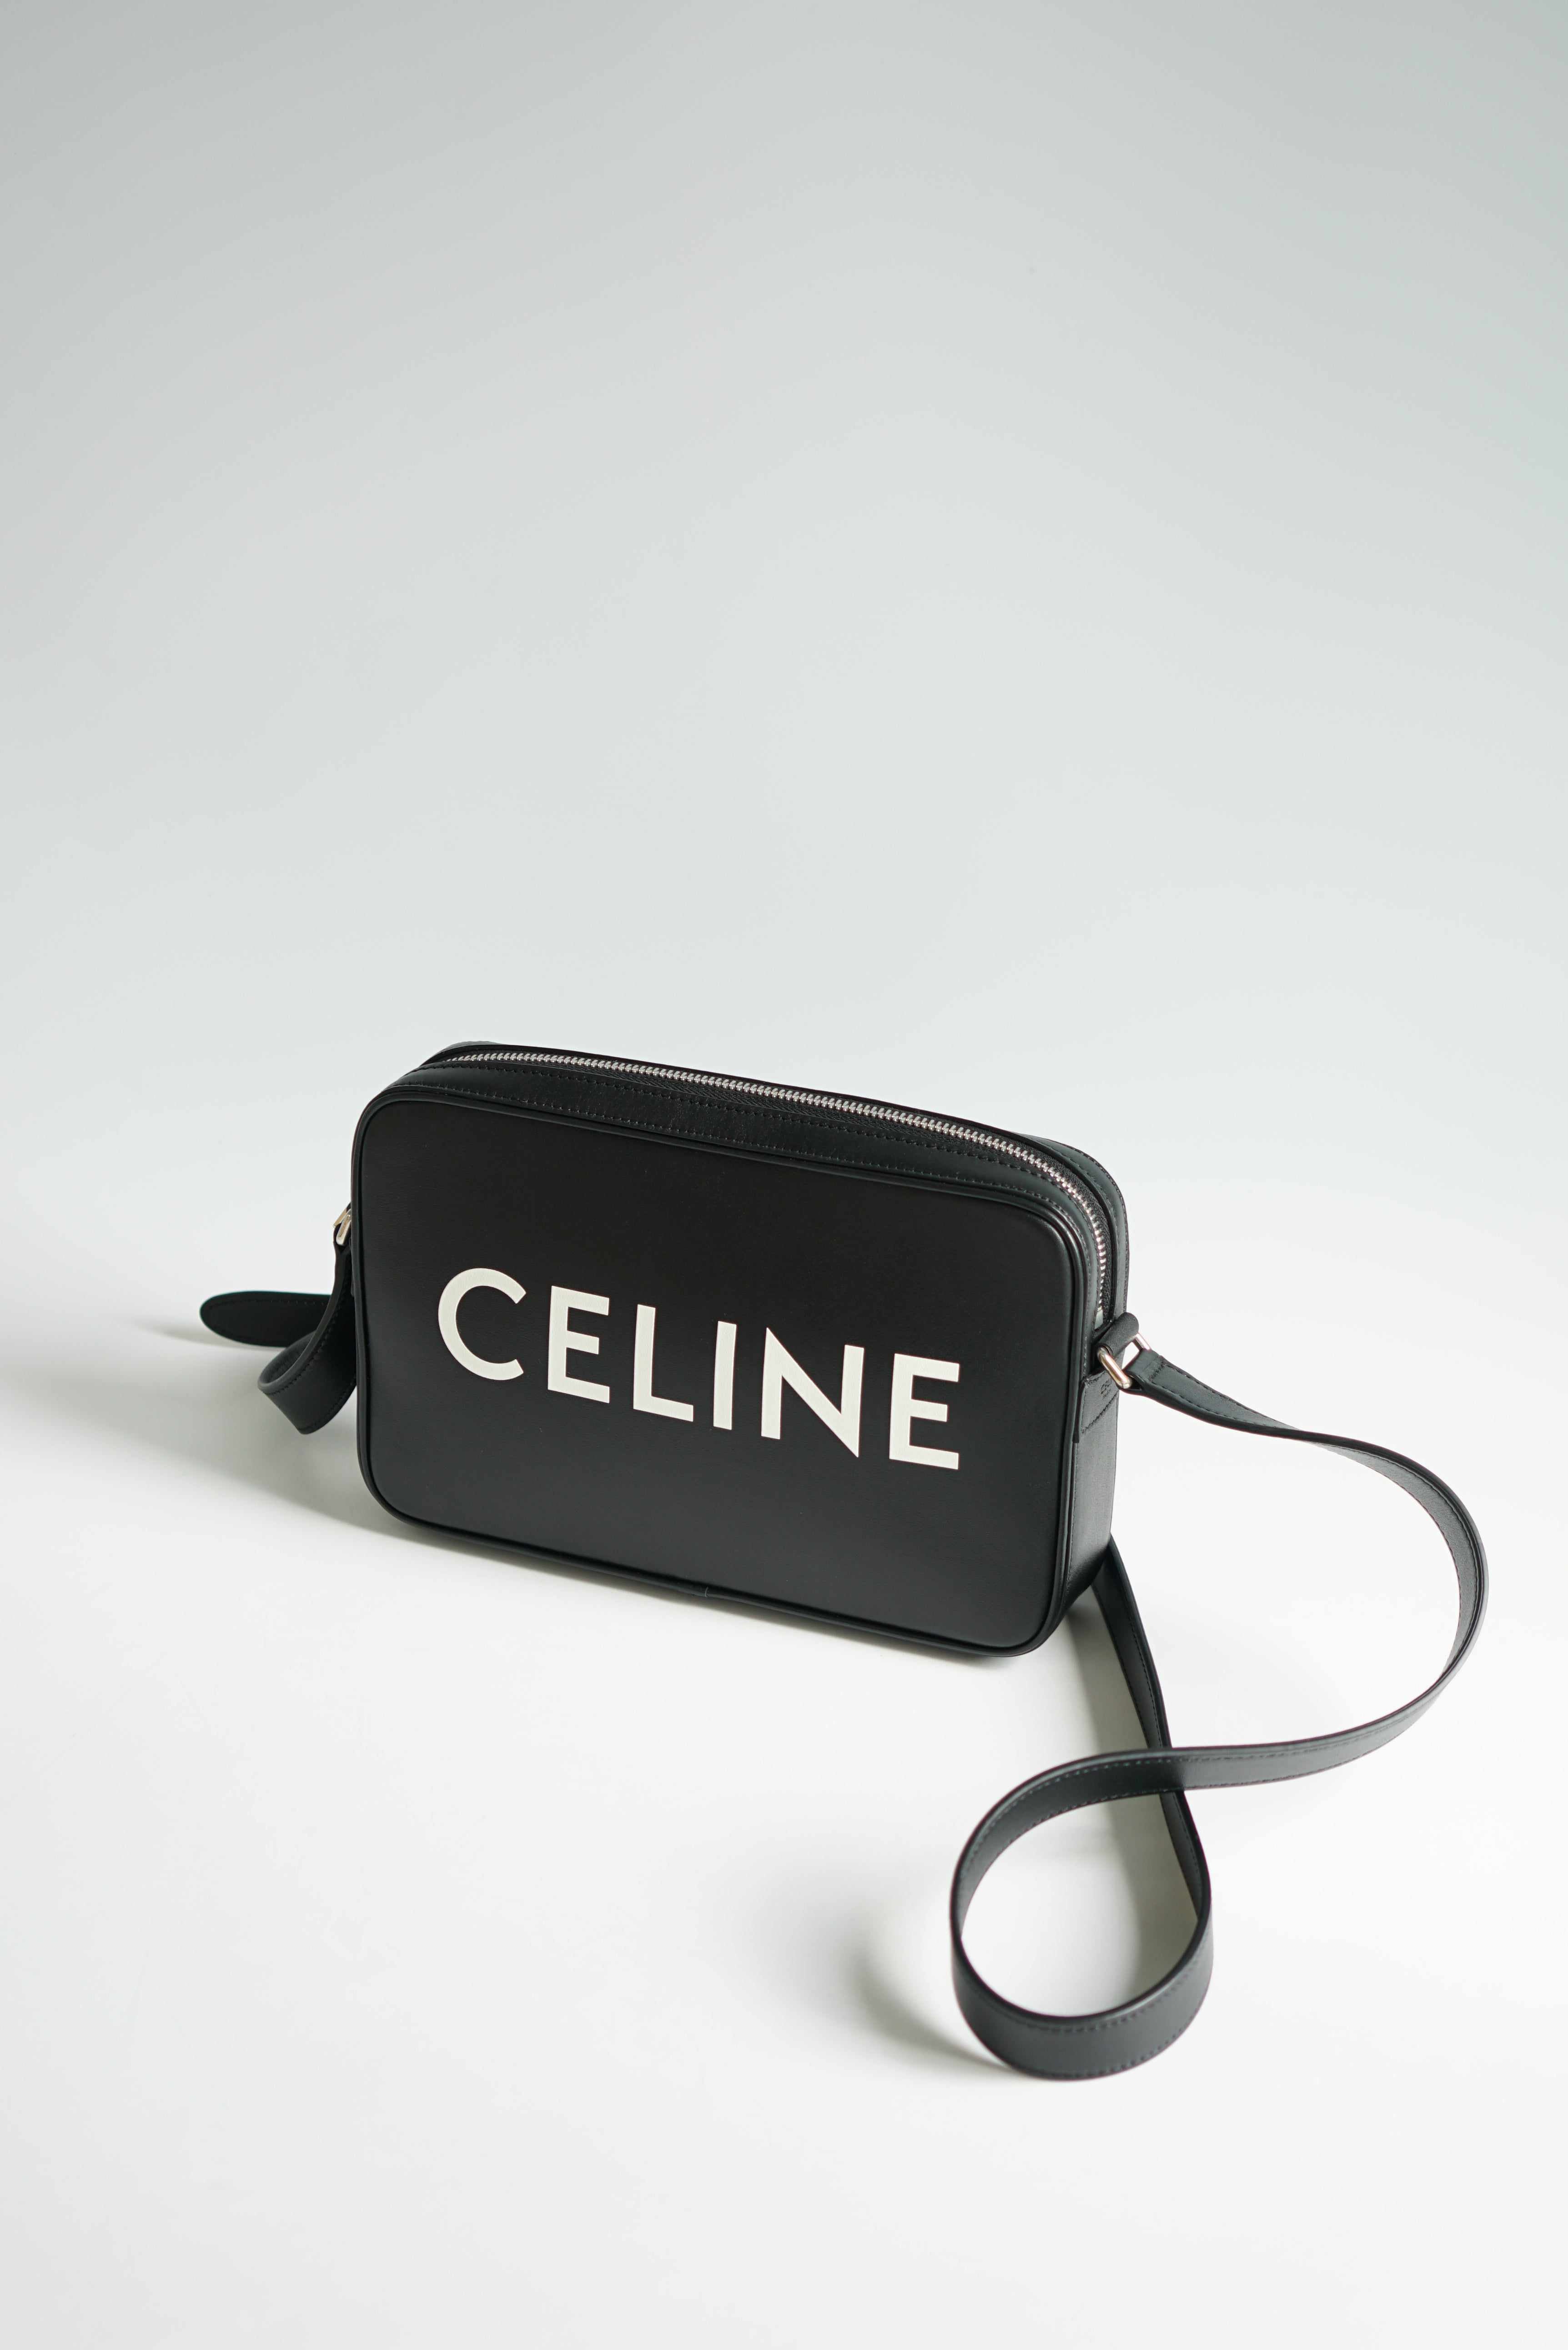 I think I found the perfect pouch from Celine! | Gallery posted by  michelleorgeta | Lemon8